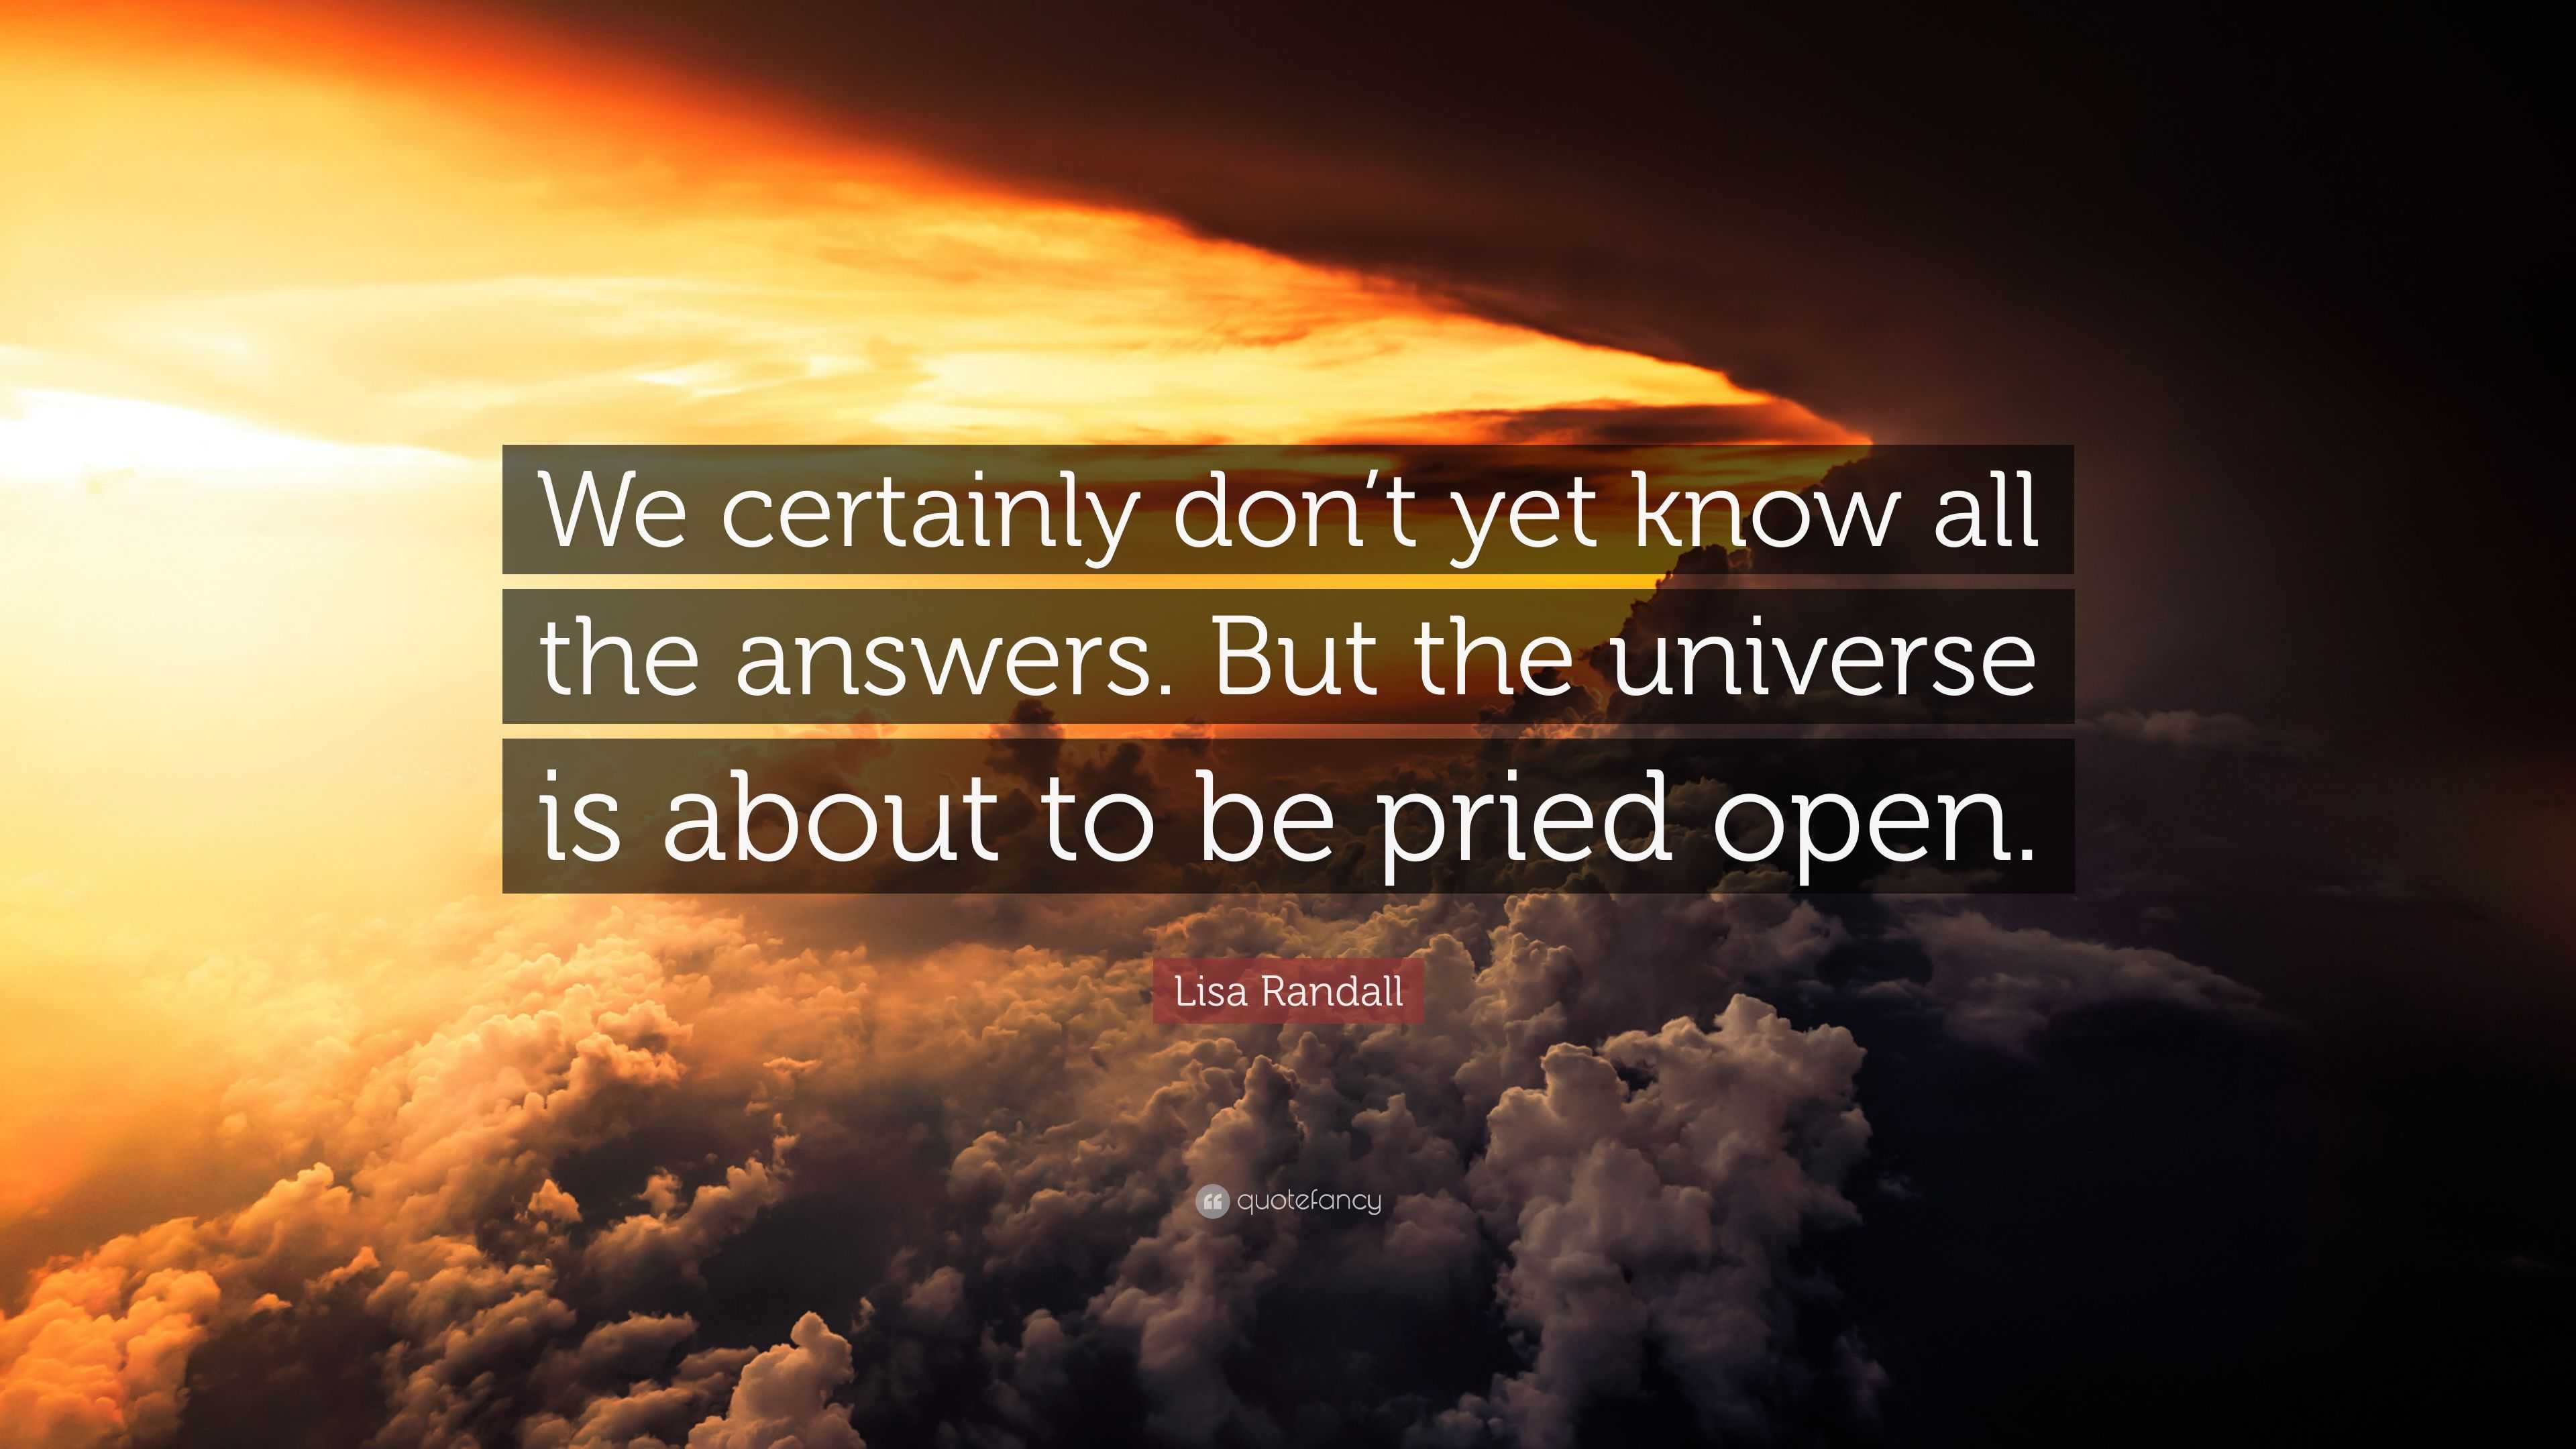 Lisa Randall Quote: “We certainly don’t yet know all the answers. But ...